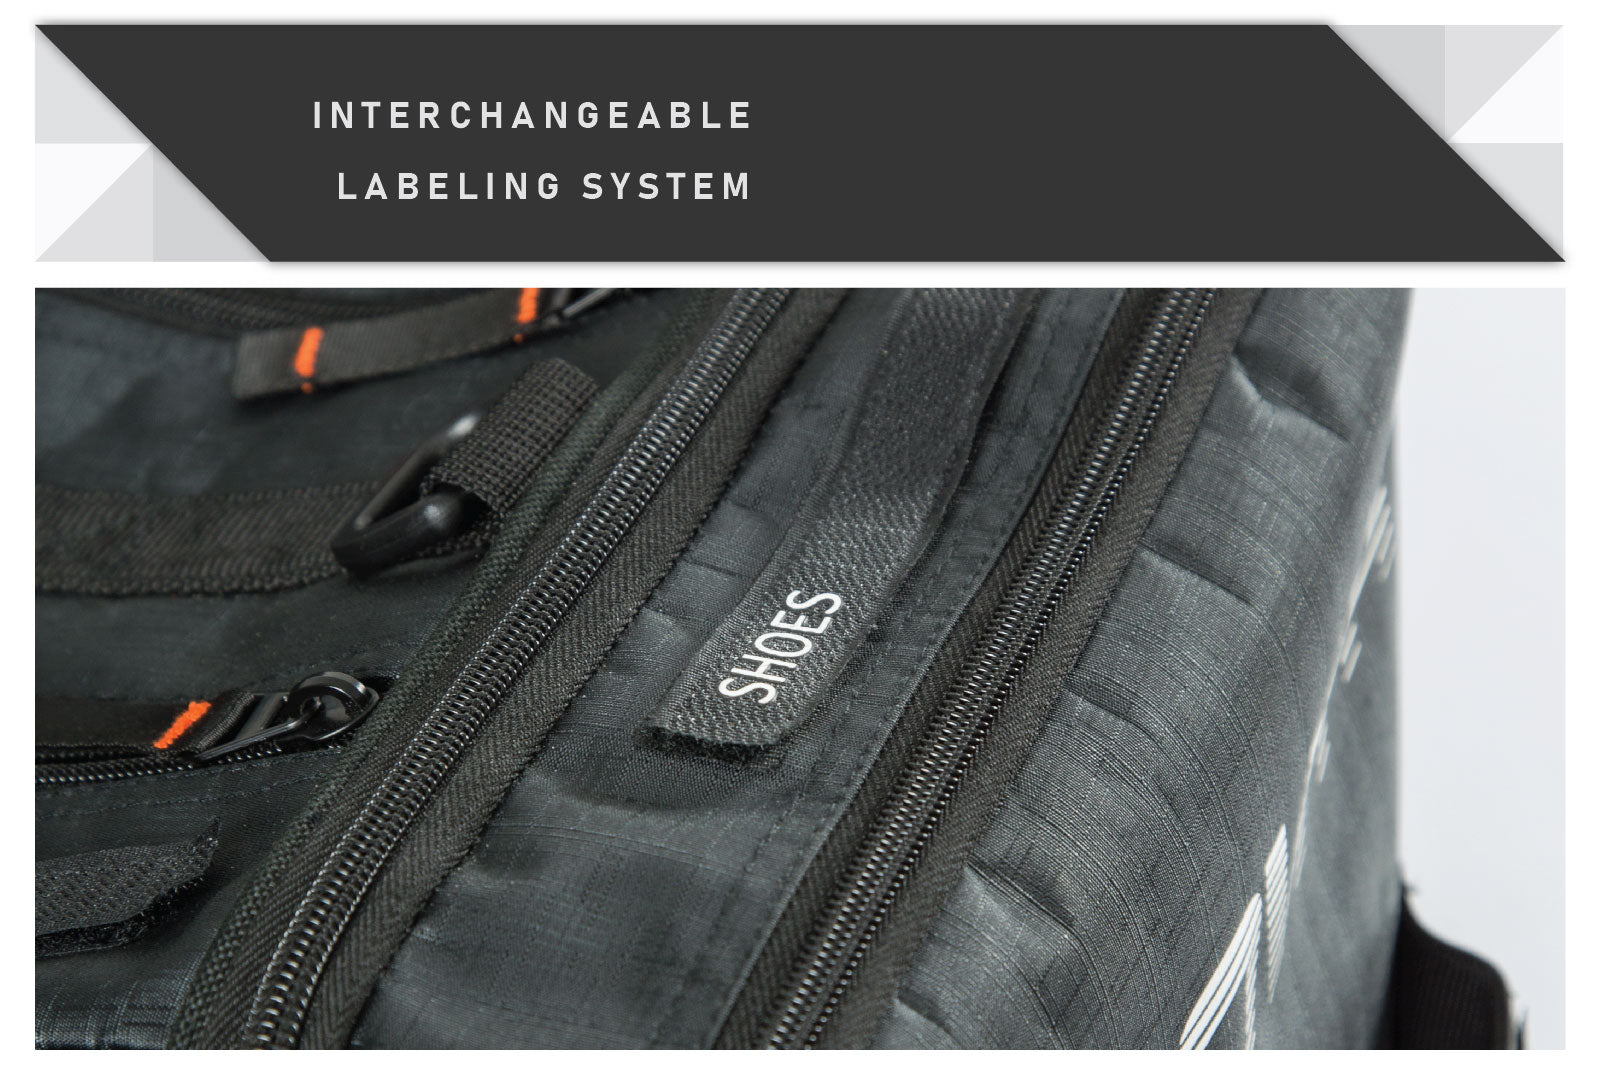 Cycling kit bag with interchangeable labels